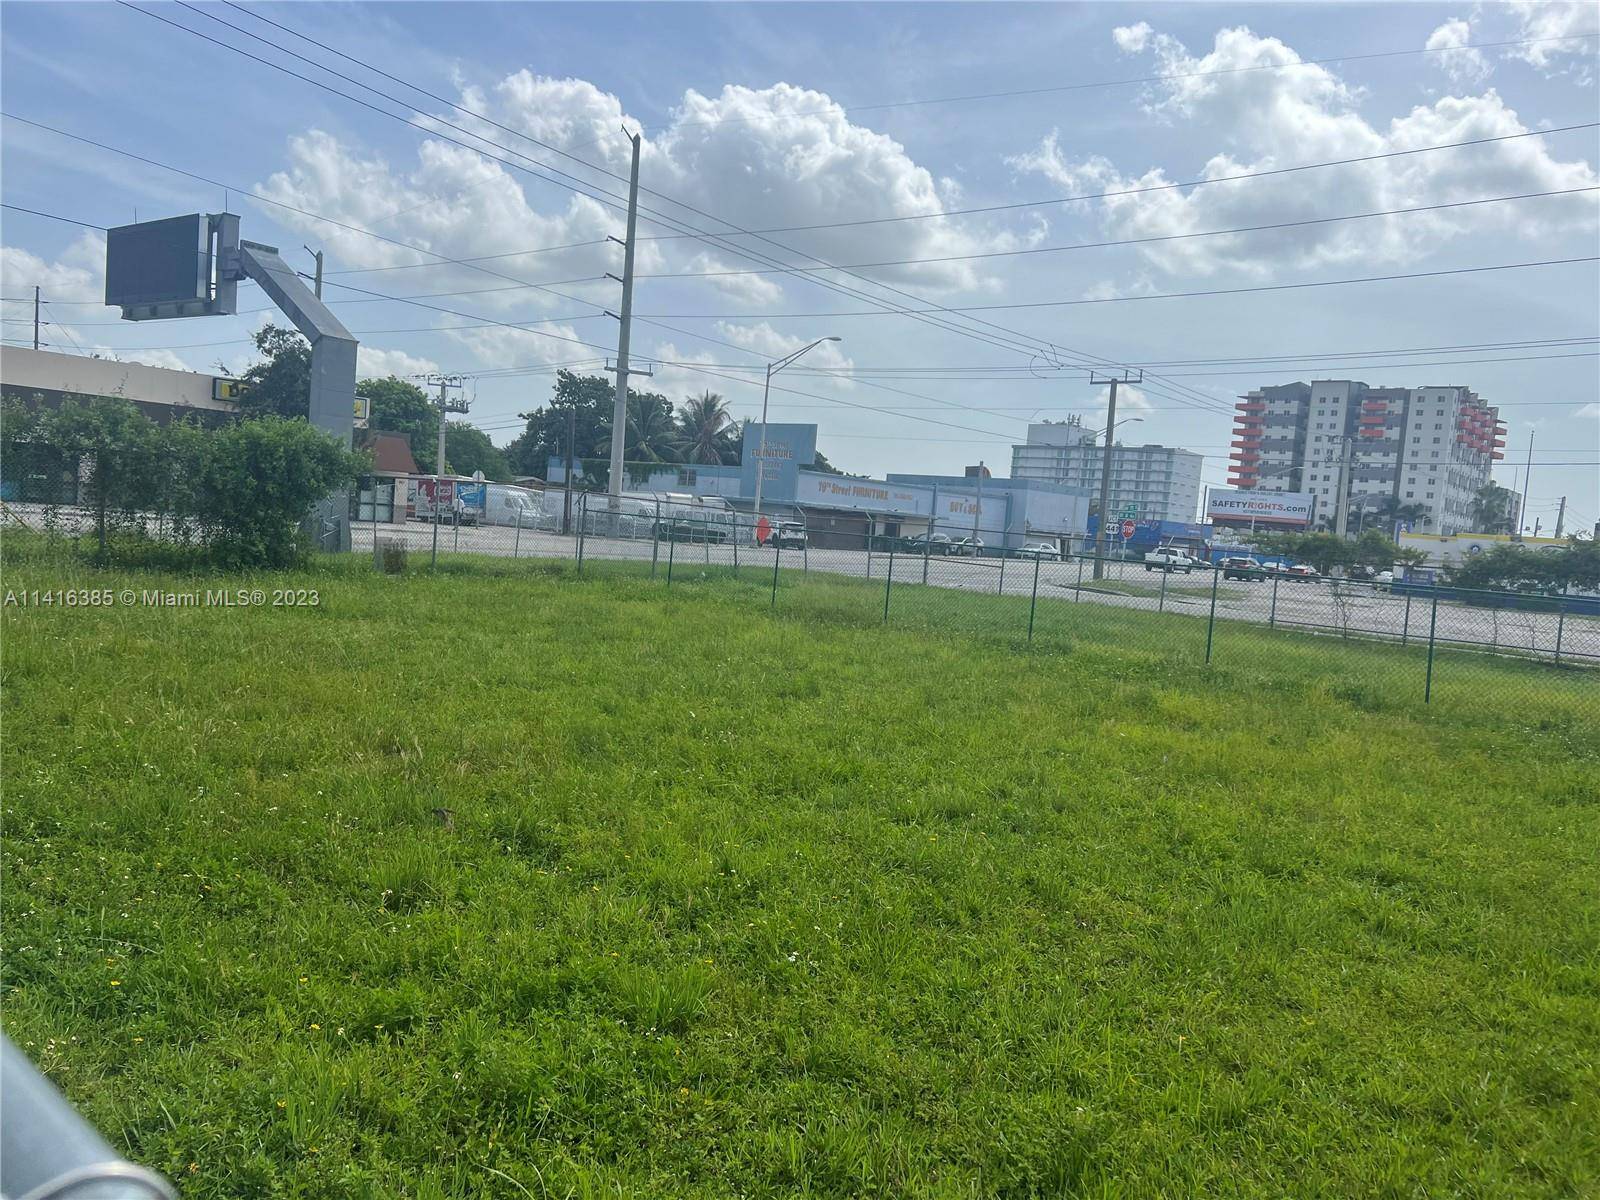 Vacant land directly on NW 79 Street, Major East West corridors, blocks 195, direct access to Miami Beach, Zoned UC MC, Mixed use and Multifamily allowed.